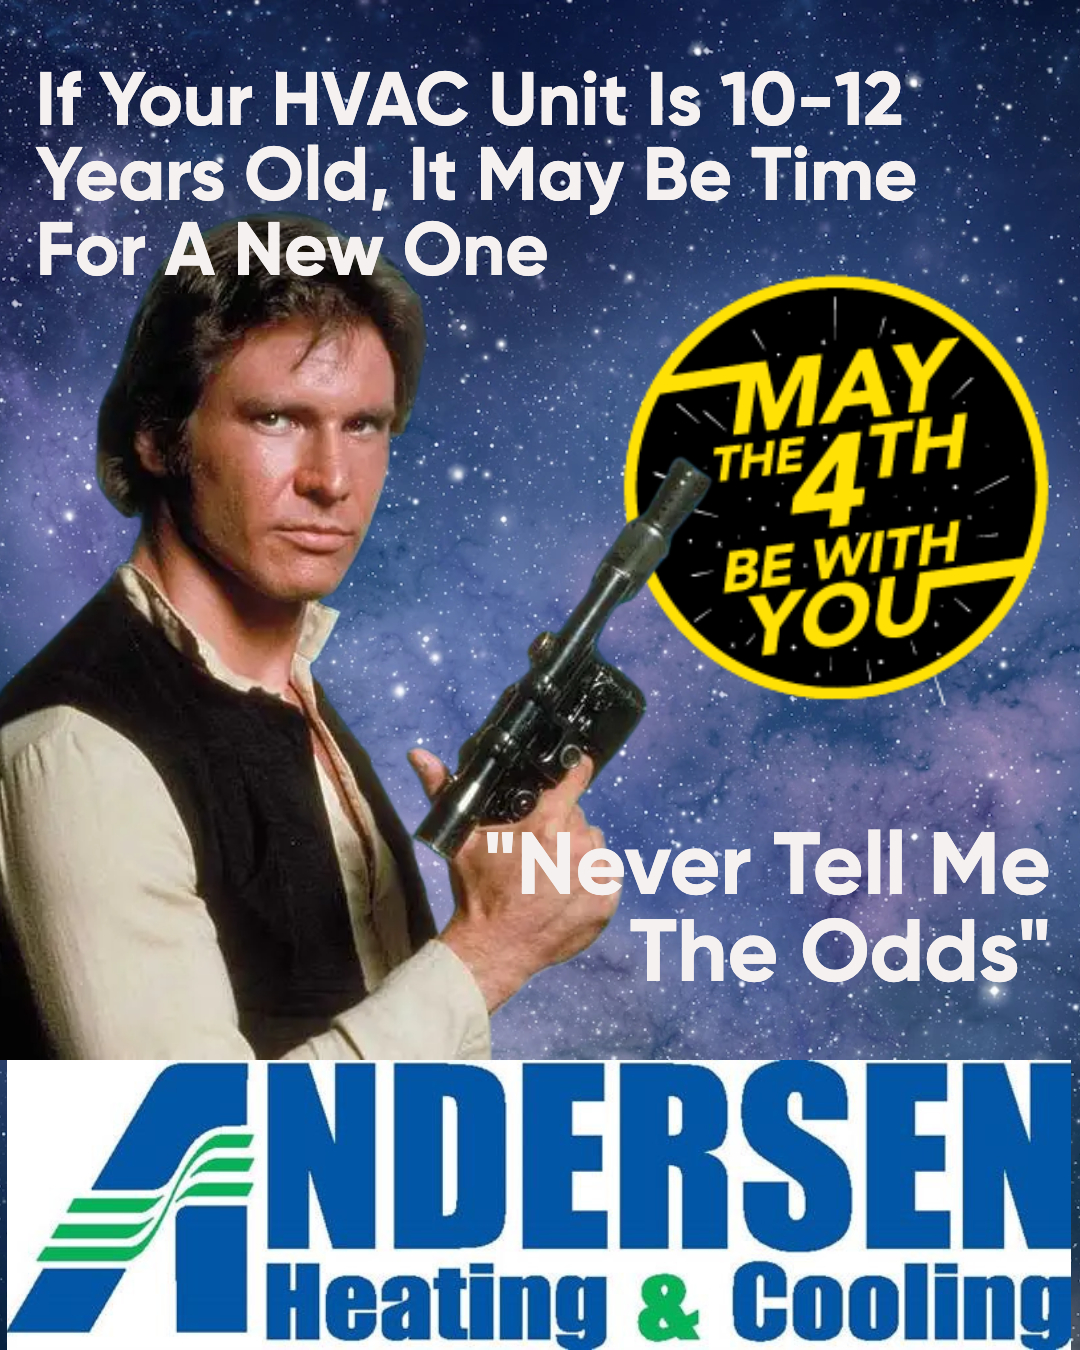 HVAC_Social_Media - May the 4th be with you